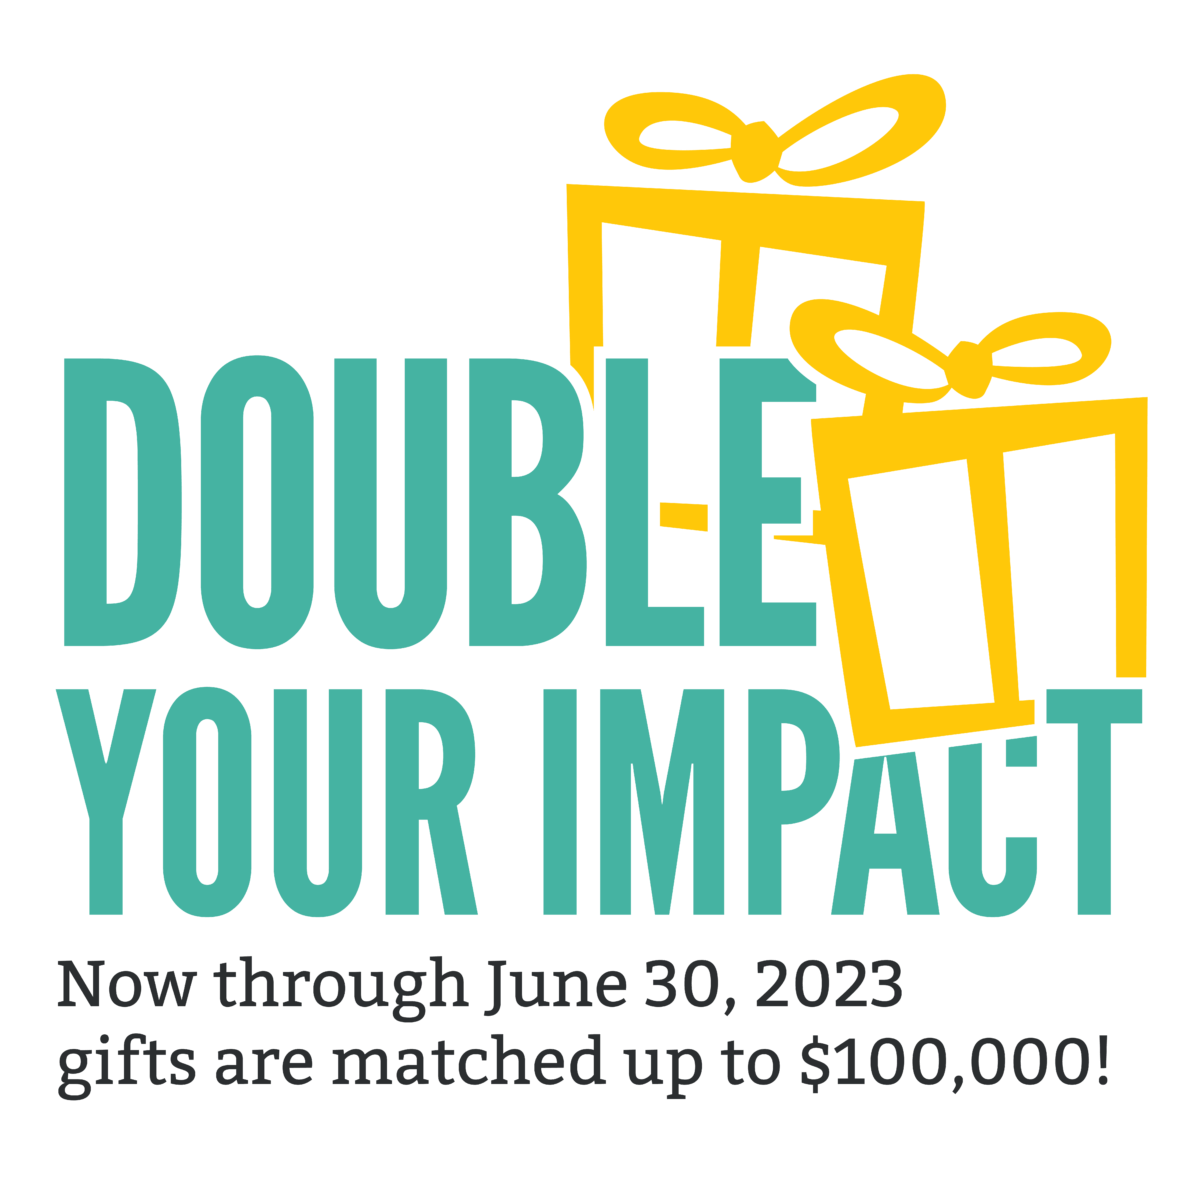 Double Your Impact Now through June 30, 2023 gifts are matched up to $100,000!